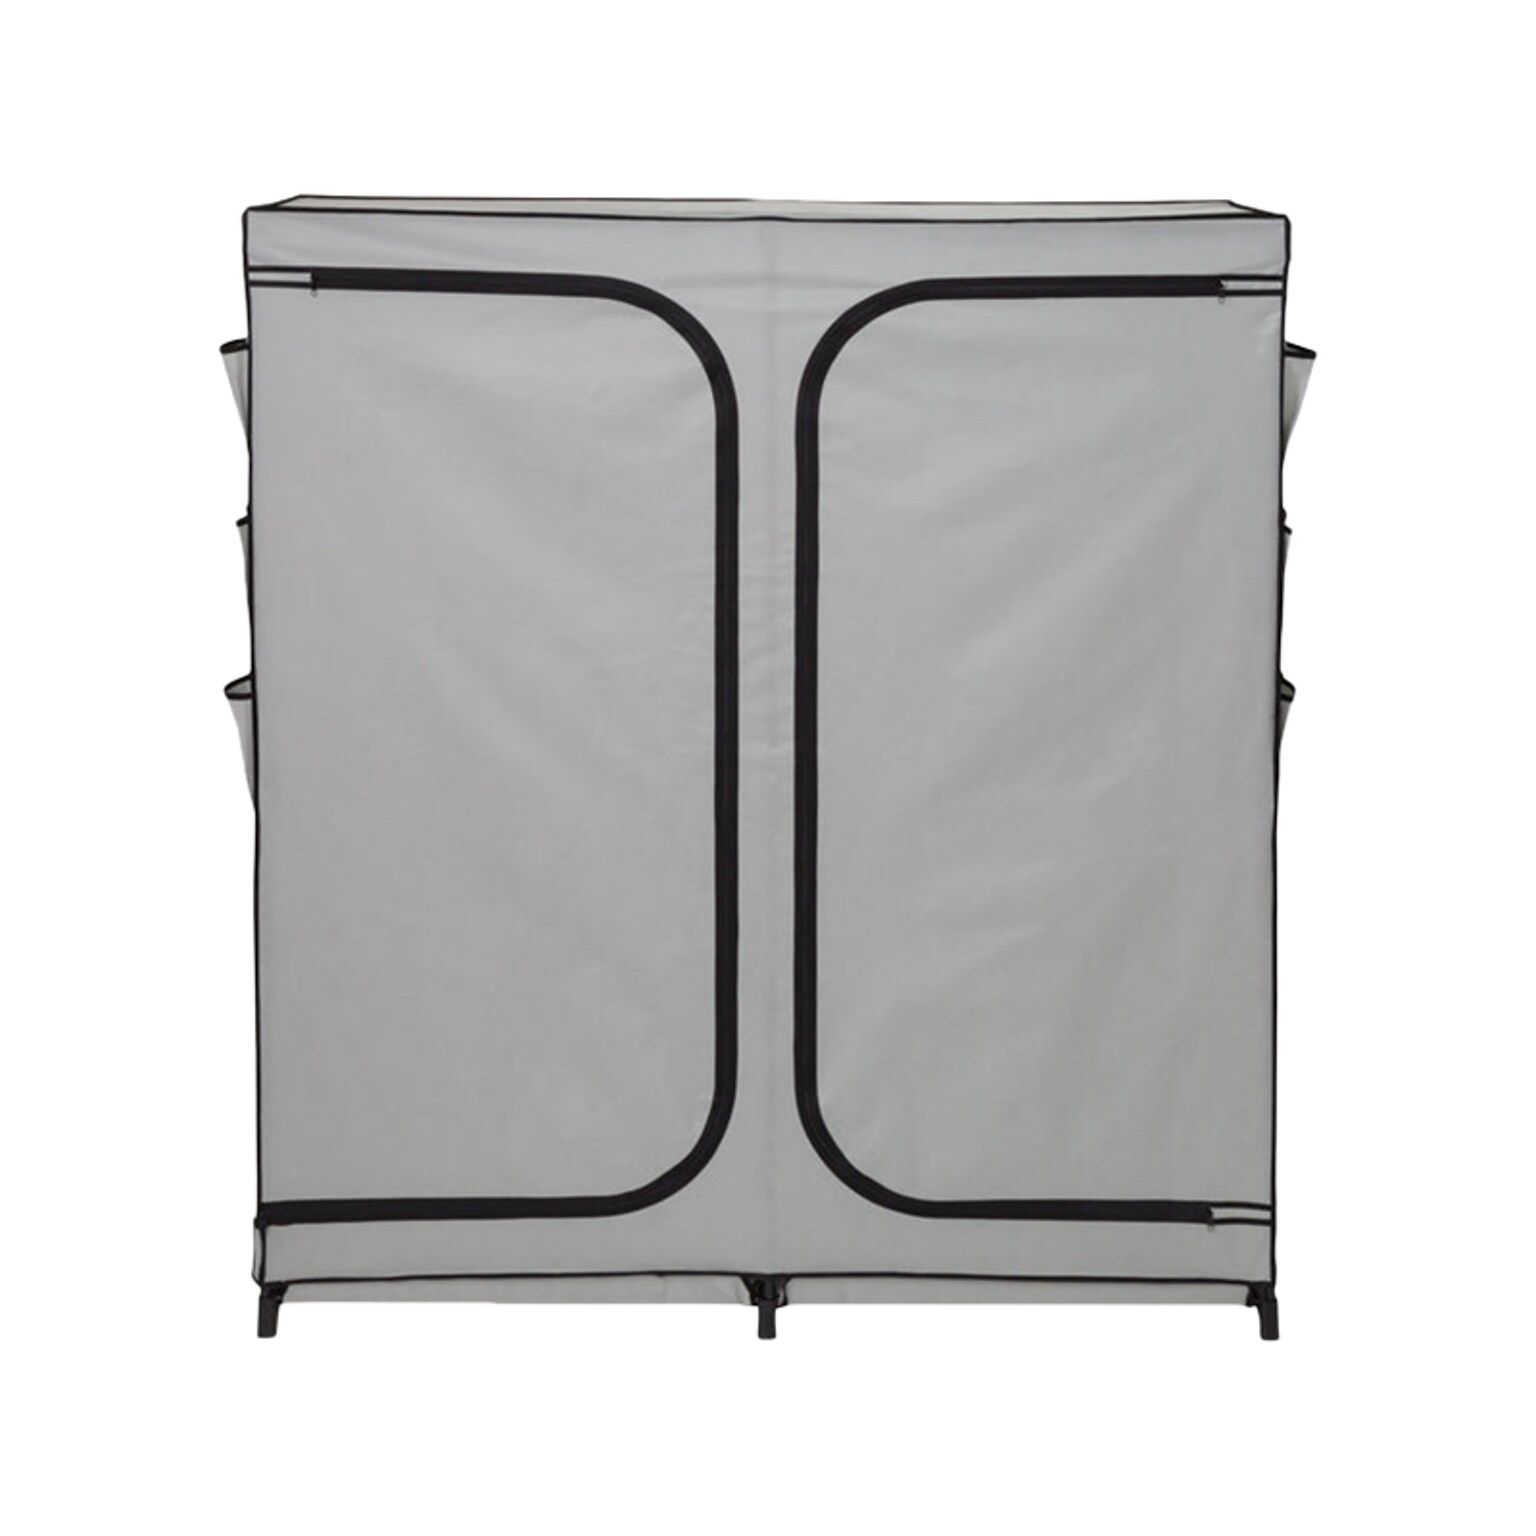 Honey-Can-Do 64 x 60 Portable Wardrobe Closet with Side Pockets, Gray/Black Steel/Polyester (WRD-09197)